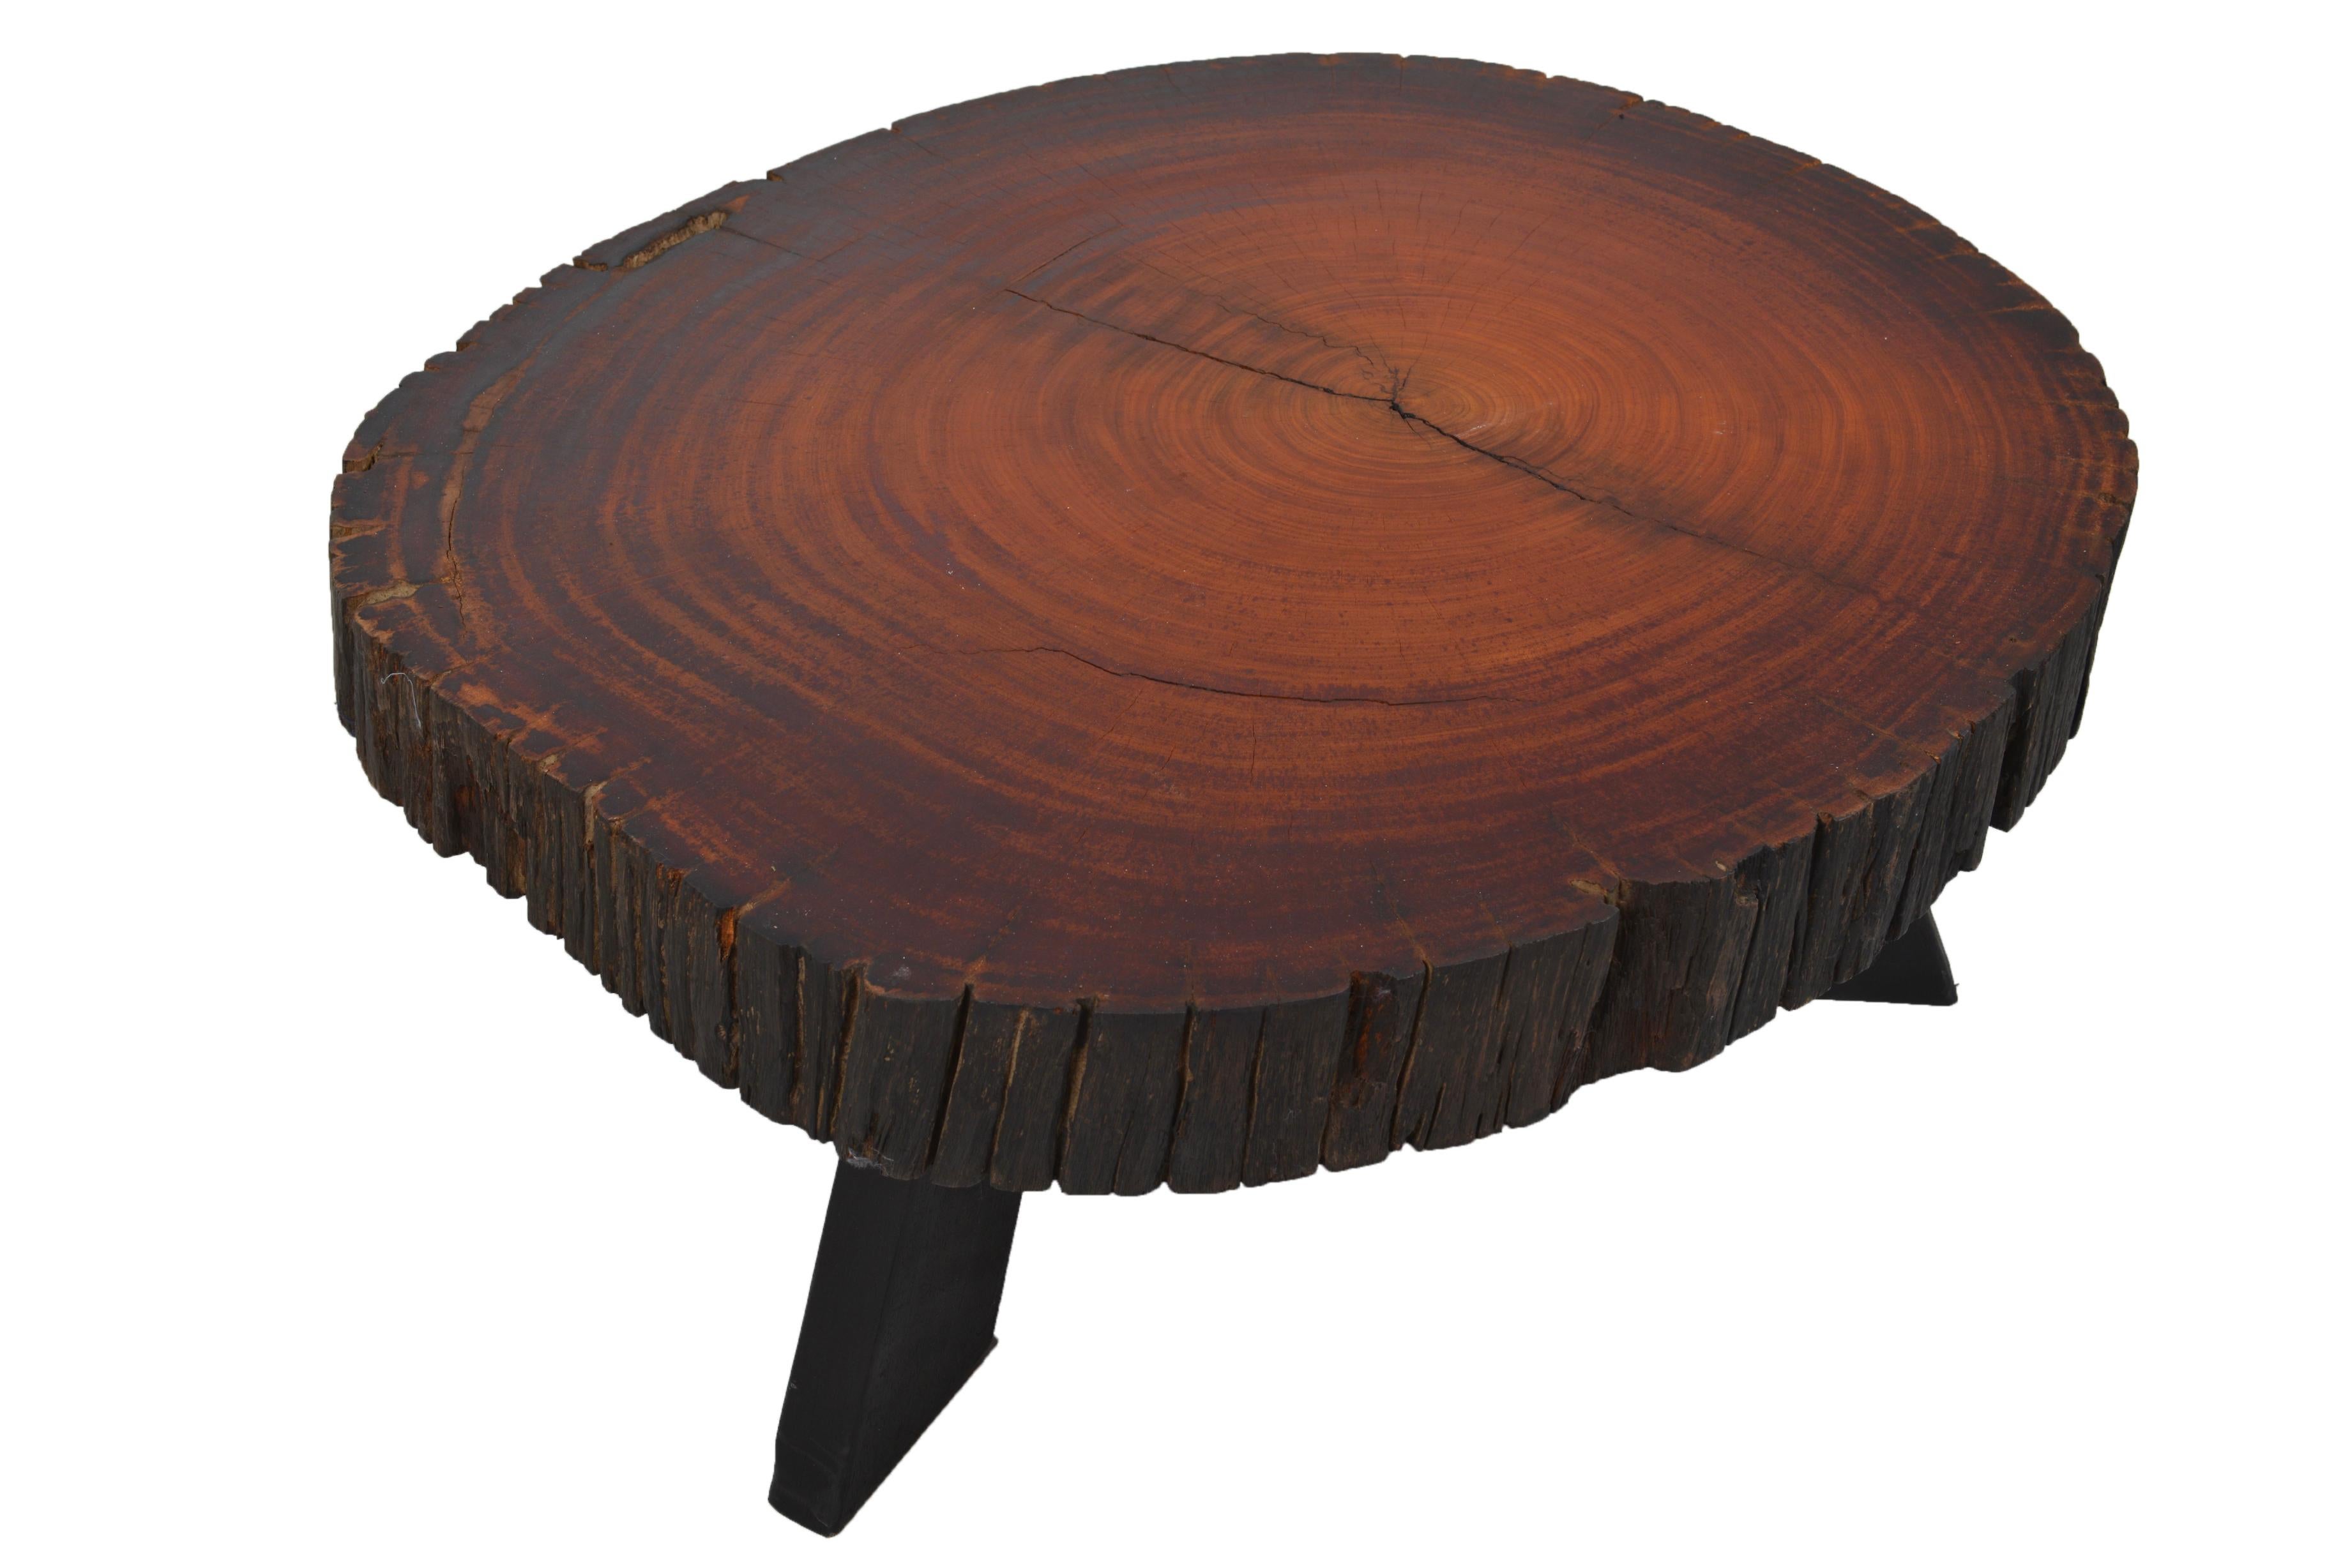 Solid tree trunk table made of a thick cross section of exotic wood. Top stands on 3 ebonized wooden legs.